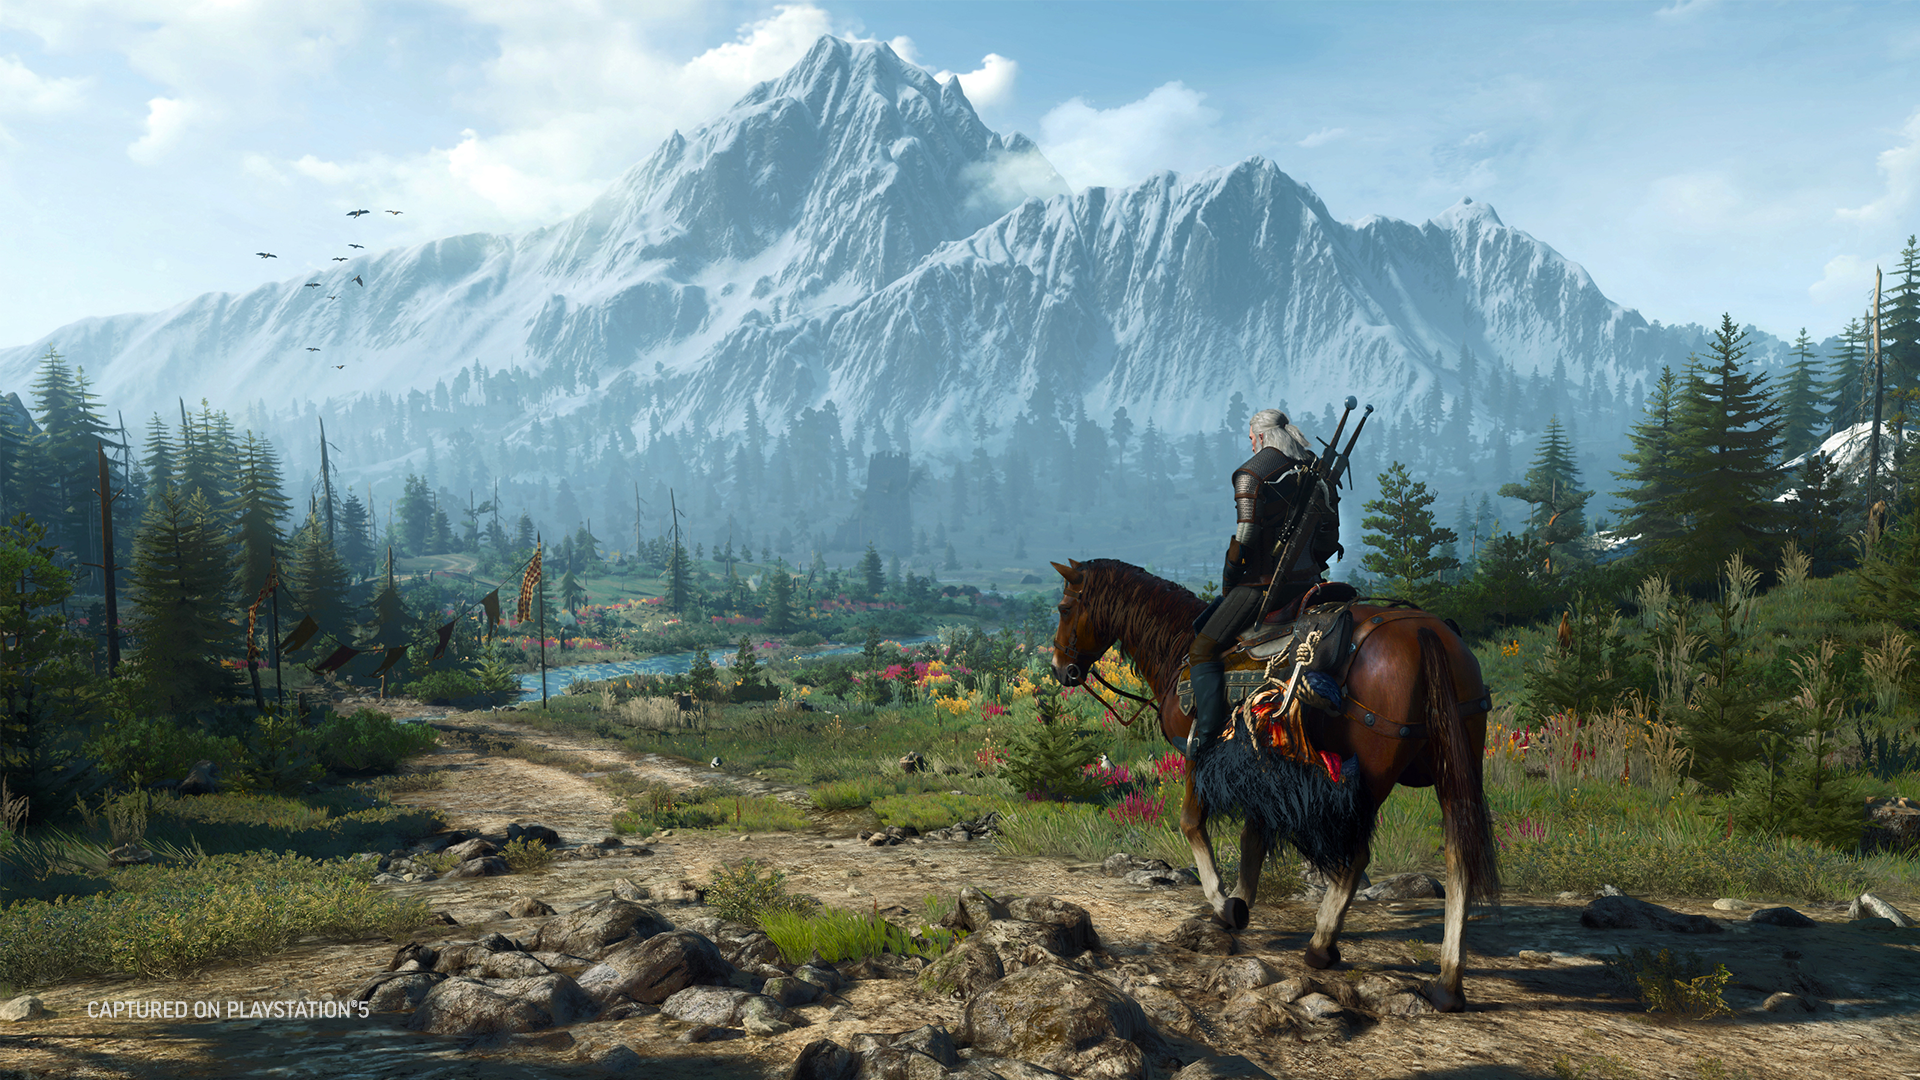 The Witcher 3: Wild Hunt - Game of the Year Edition (Free PS5